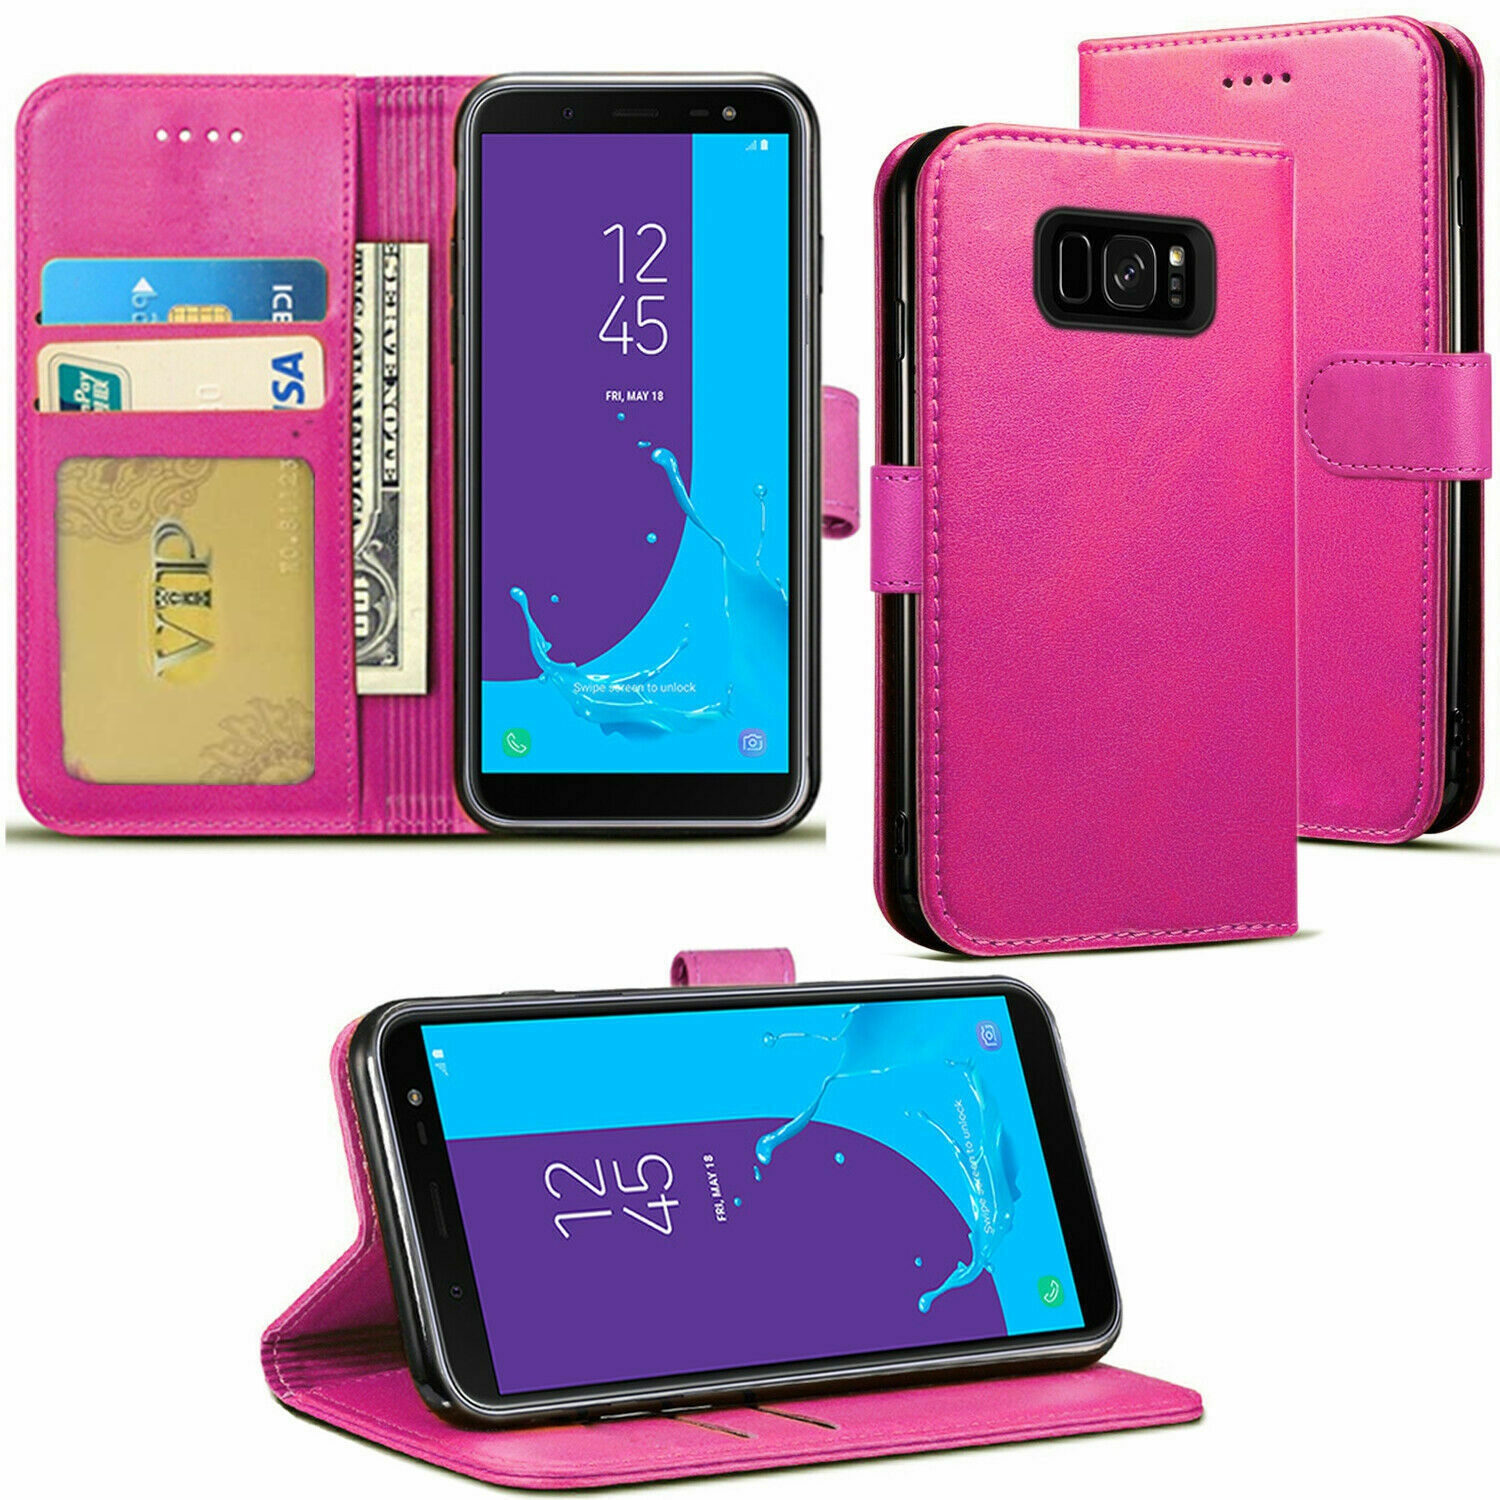 【CSmart】 Magnetic Card Slot Leather Folio Wallet Flip Case Cover for Samsung Galaxy S6 Edge, Hot Pink